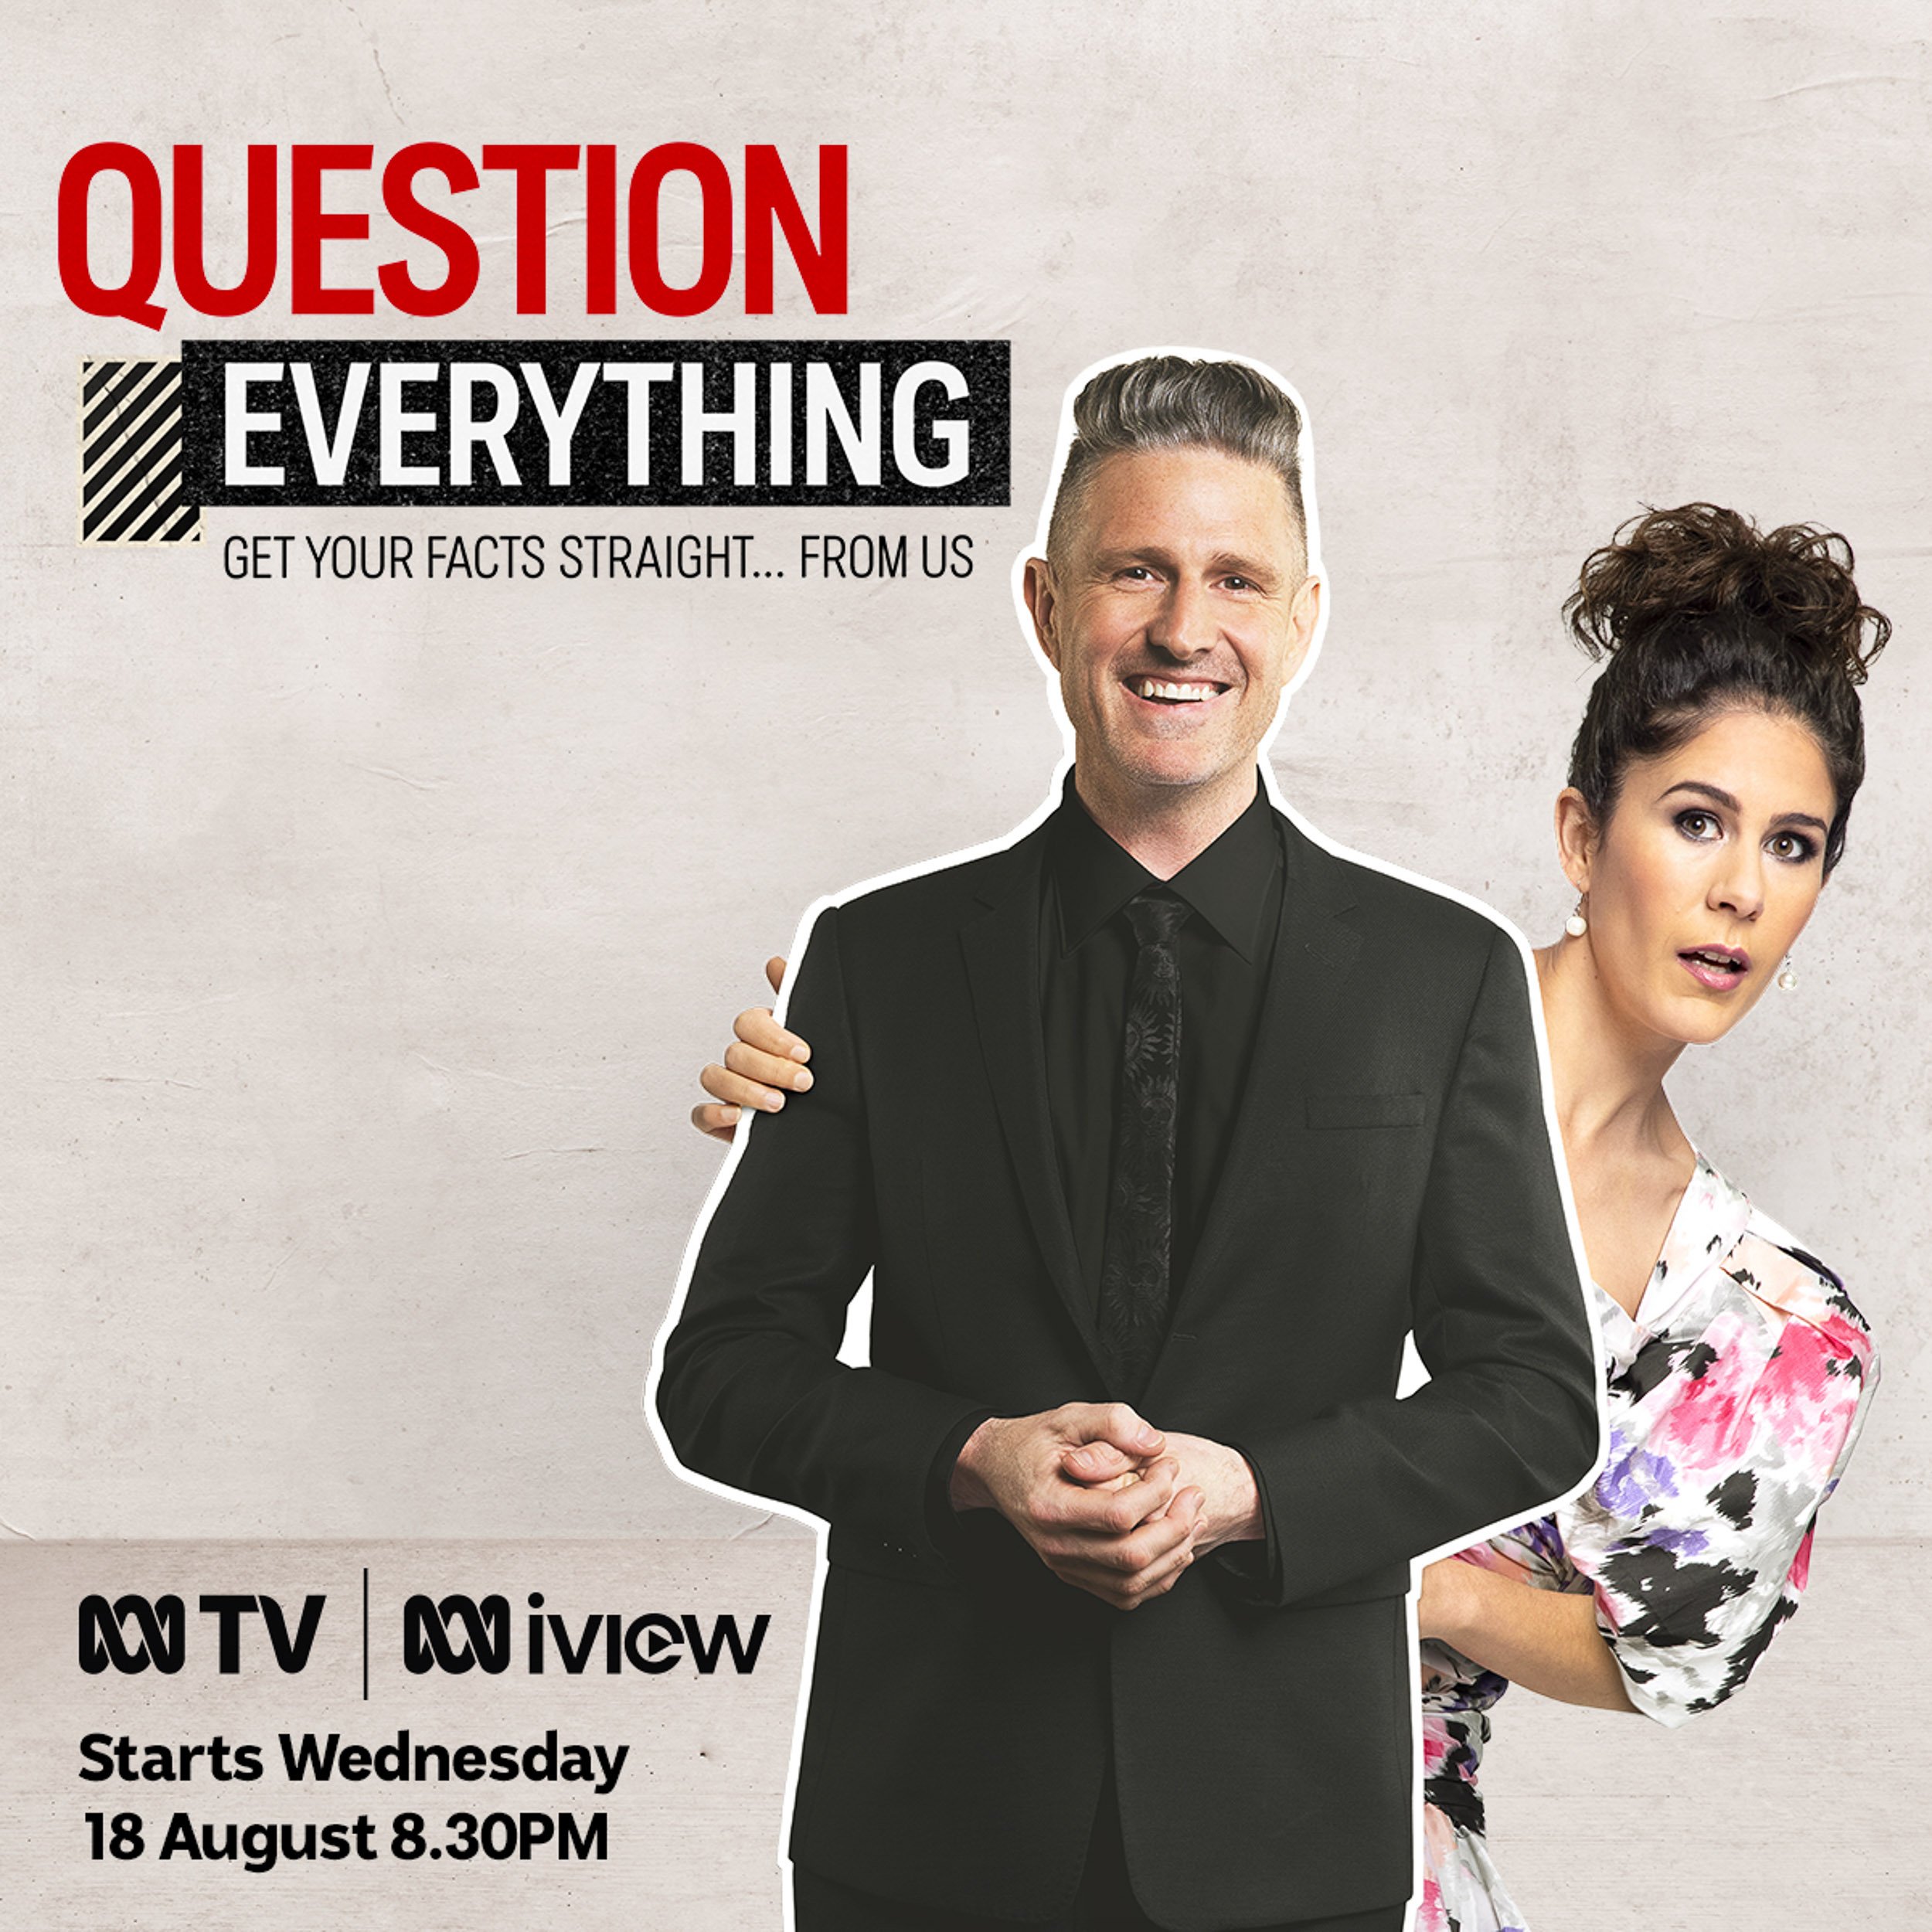 Question Everything marketing campaign for ABC TV